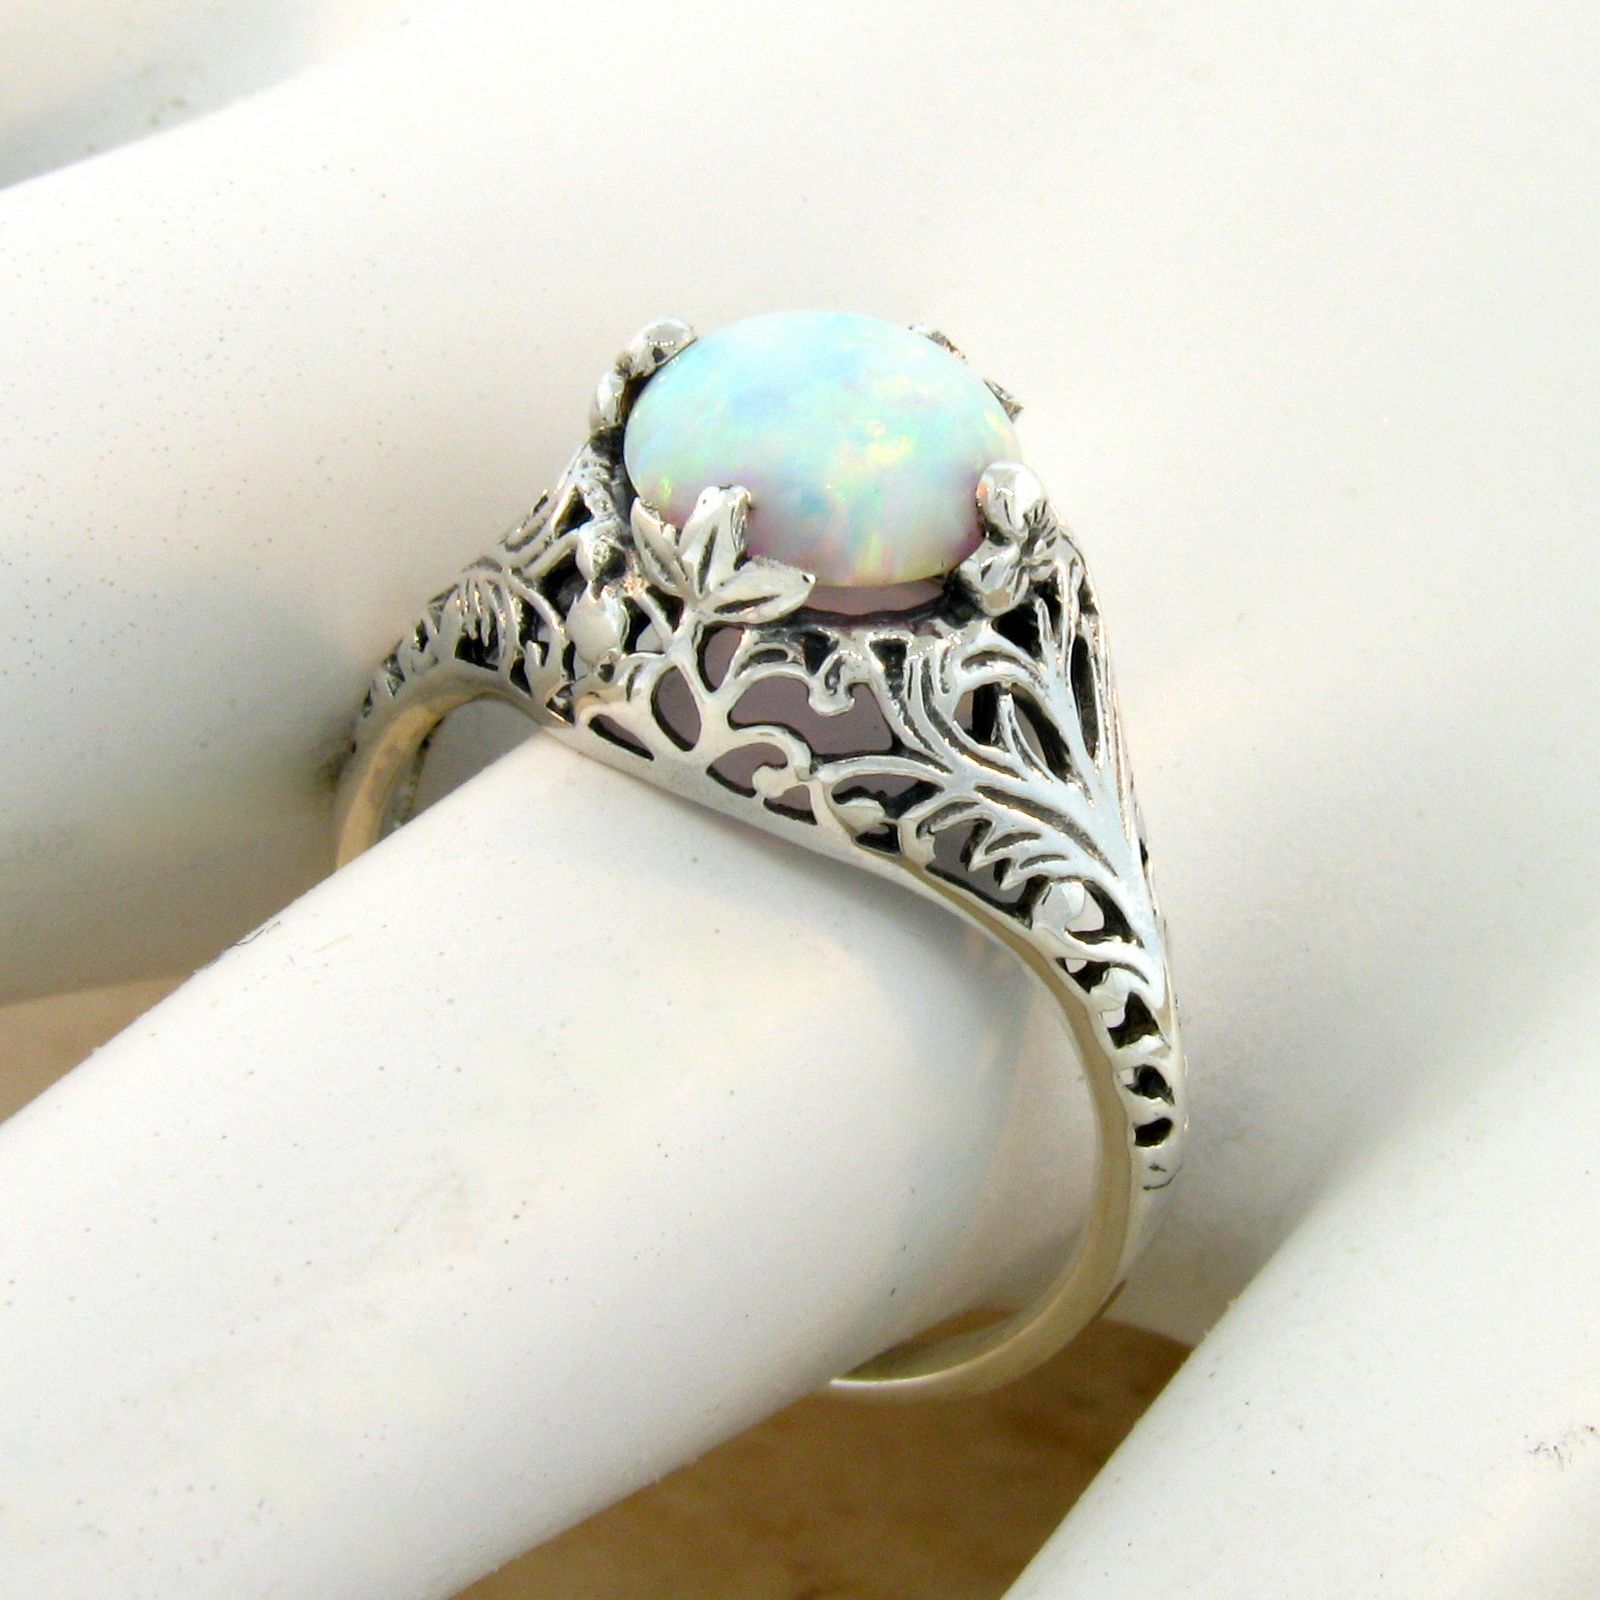 WHITE OPAL ANTIQUE FILIGREE DESIGN 925 STERLING SILVER RING SIZE 9 ...